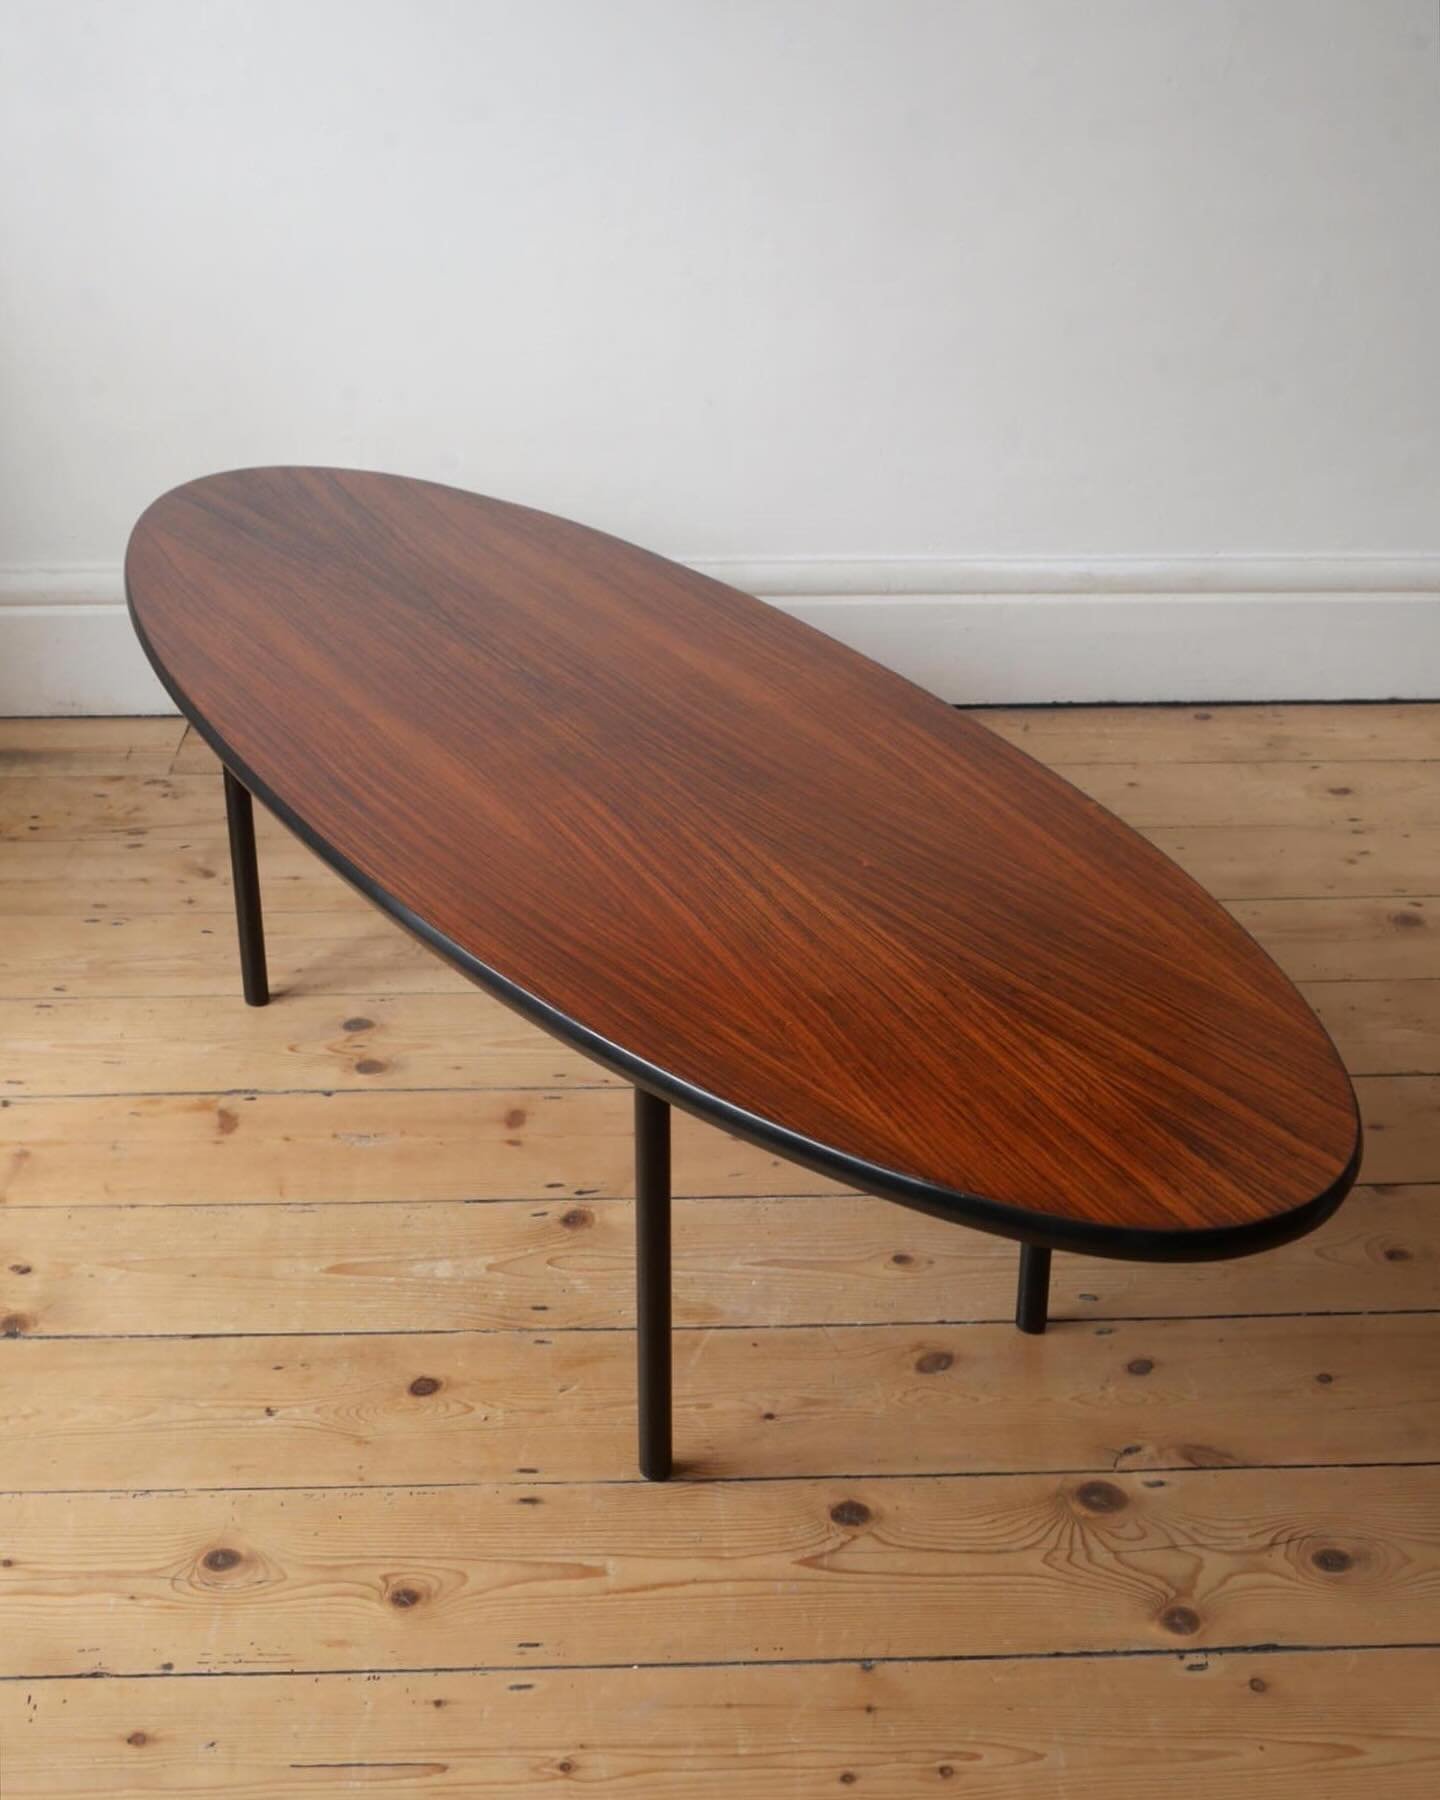 I&rsquo;m moving storage units at the end of the month so in an attempt to have less things to move I&rsquo;ve reduced prices of lots of stock across the website!

Reduced items include this super-rare 1954 coffee table by Robin Day for Hille. Beauti